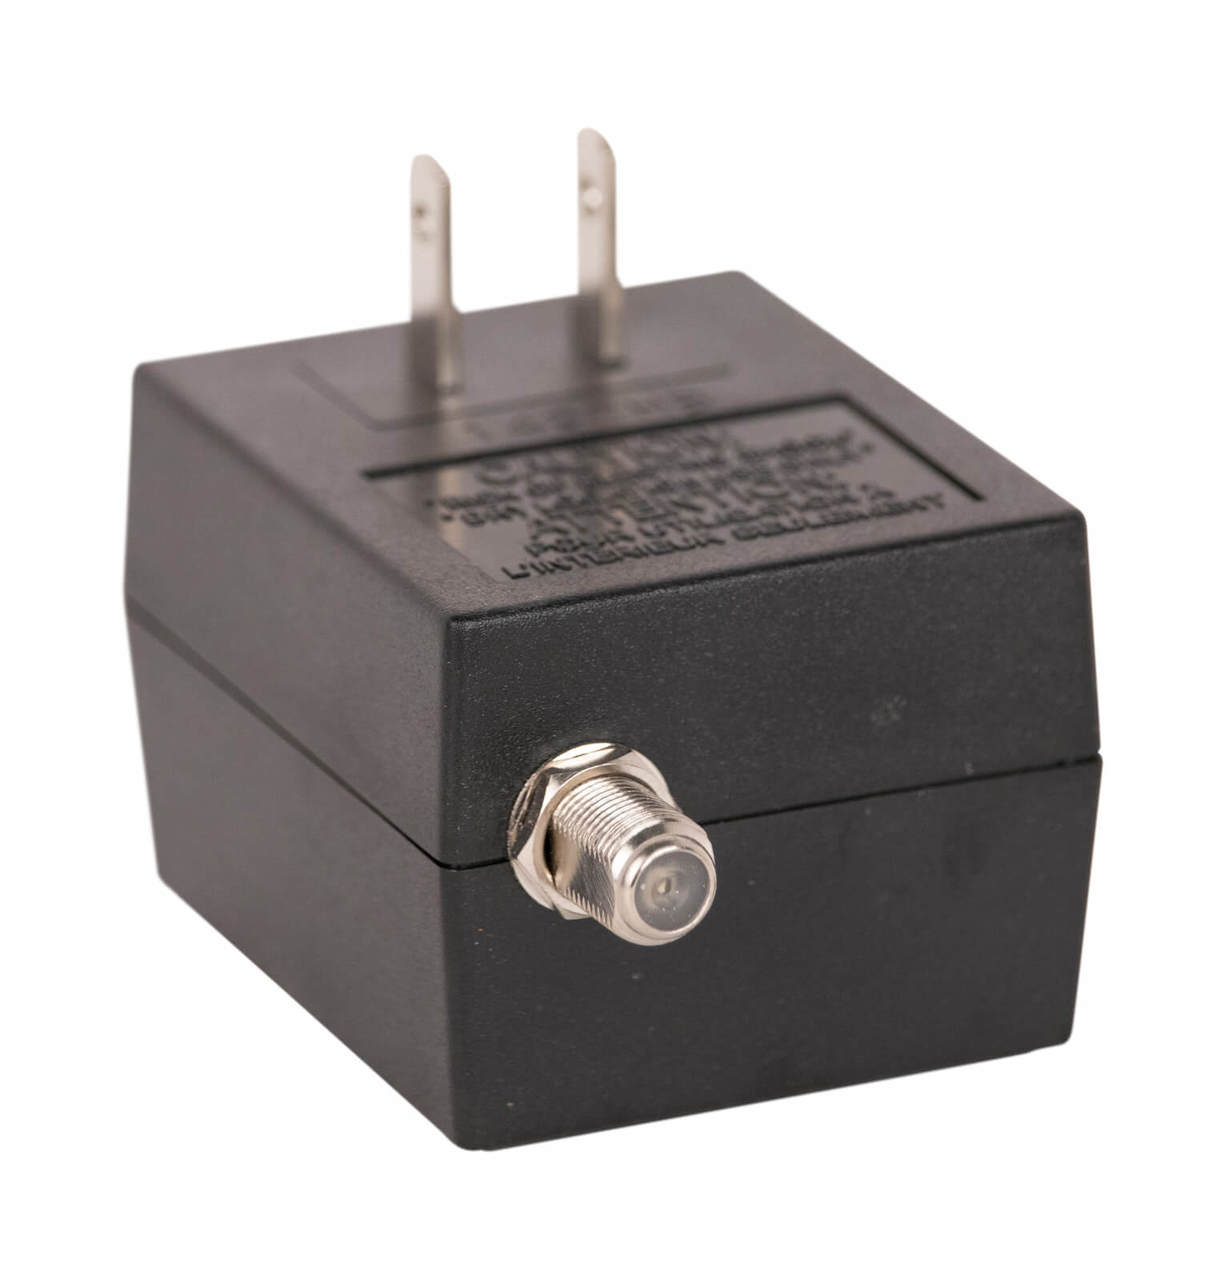 5V power supply with F-Female output connector